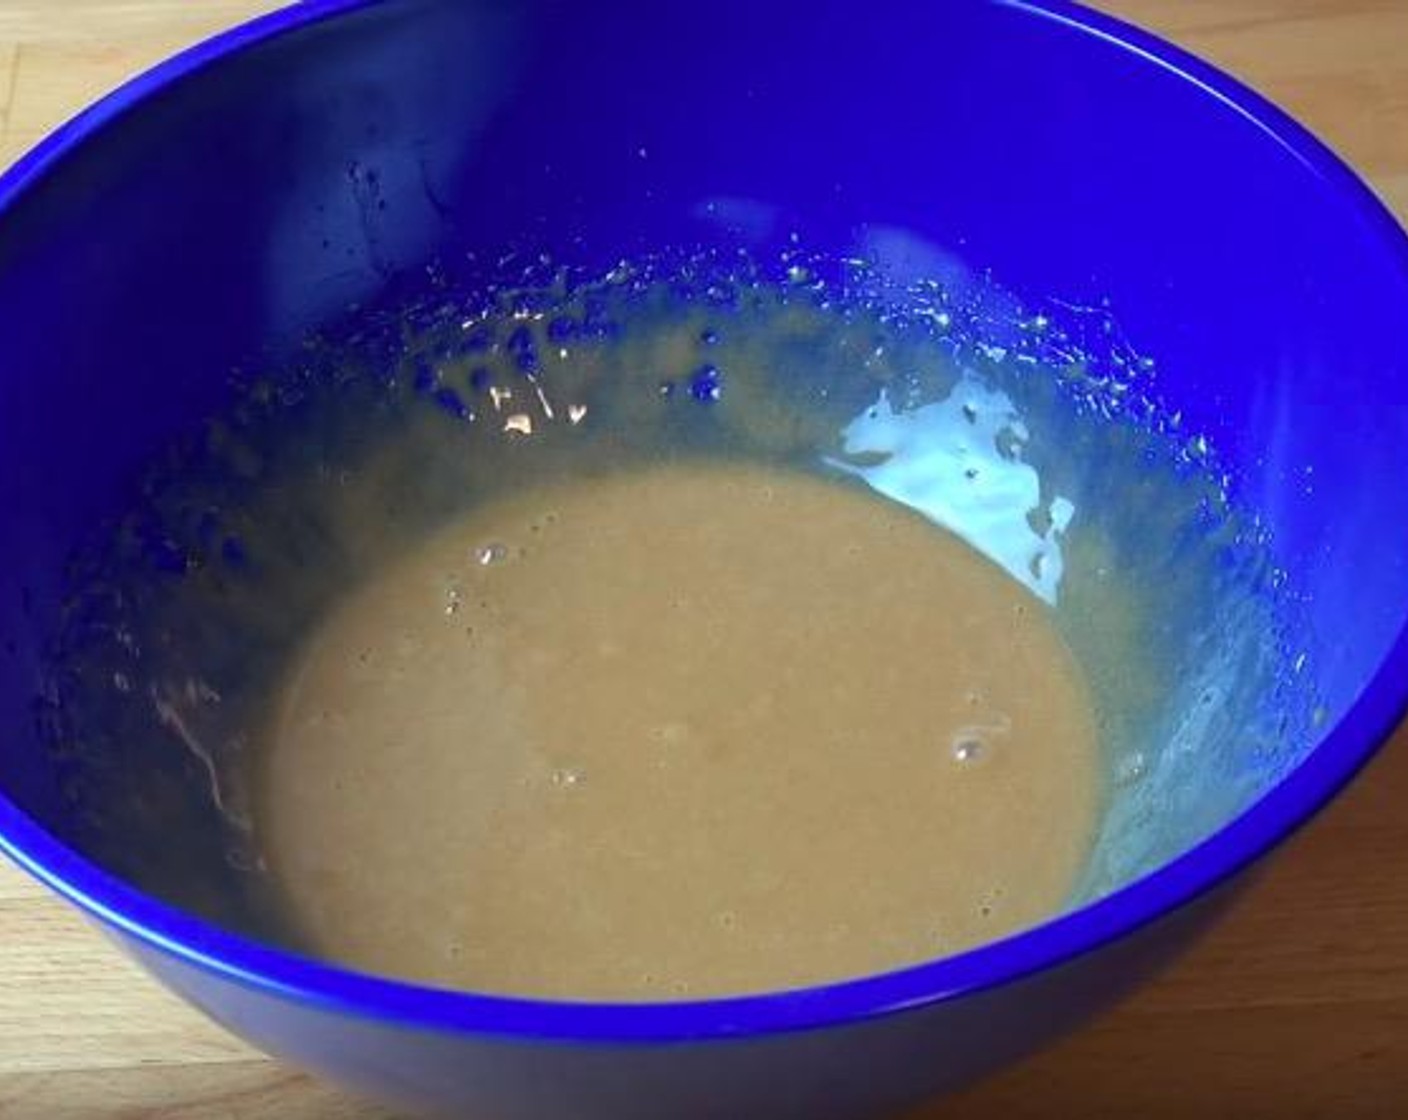 step 1 In a mixing bowl, combine Brown Sugar (1/2 cup), Olive Oil (1/2 cup), Egg (1) and Vanilla Extract (1 tsp). Beat with an electric mixer for five minutes, until thick and creamy.